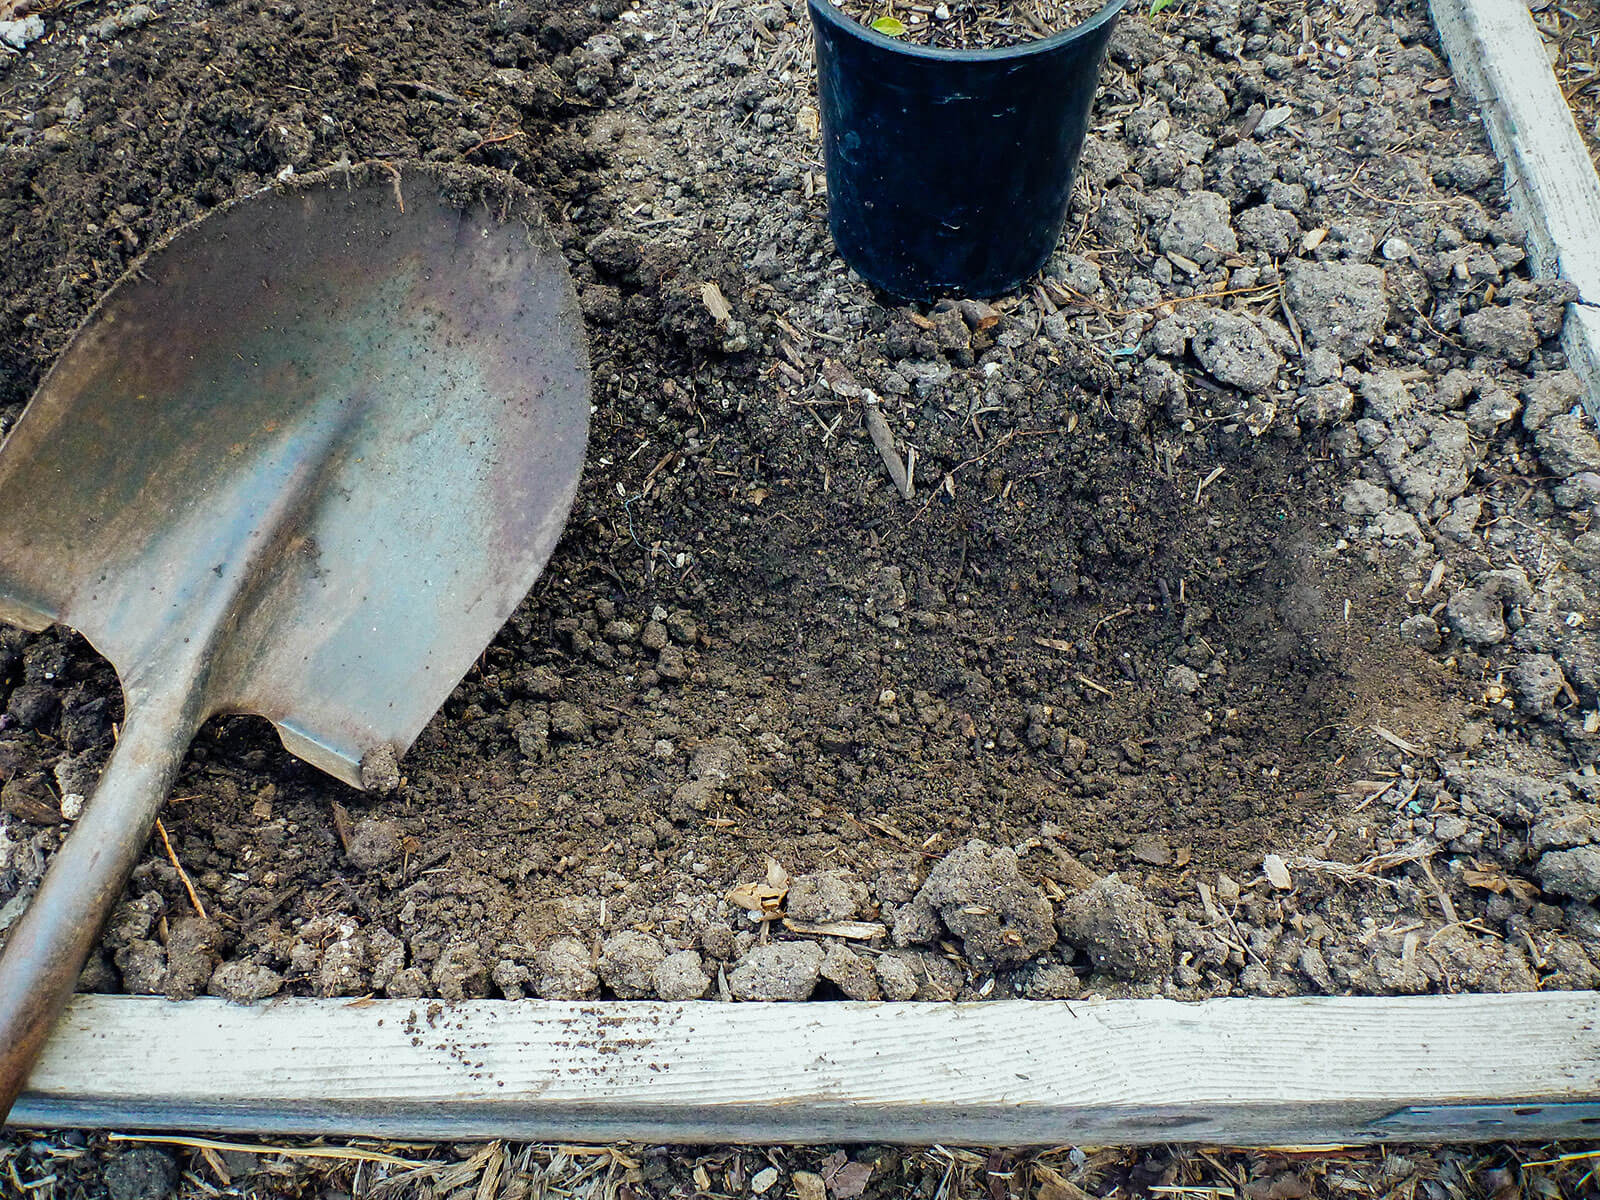 Dig a trench about 4 to 6 inches deep, with one end a bit deeper to hold the root ball